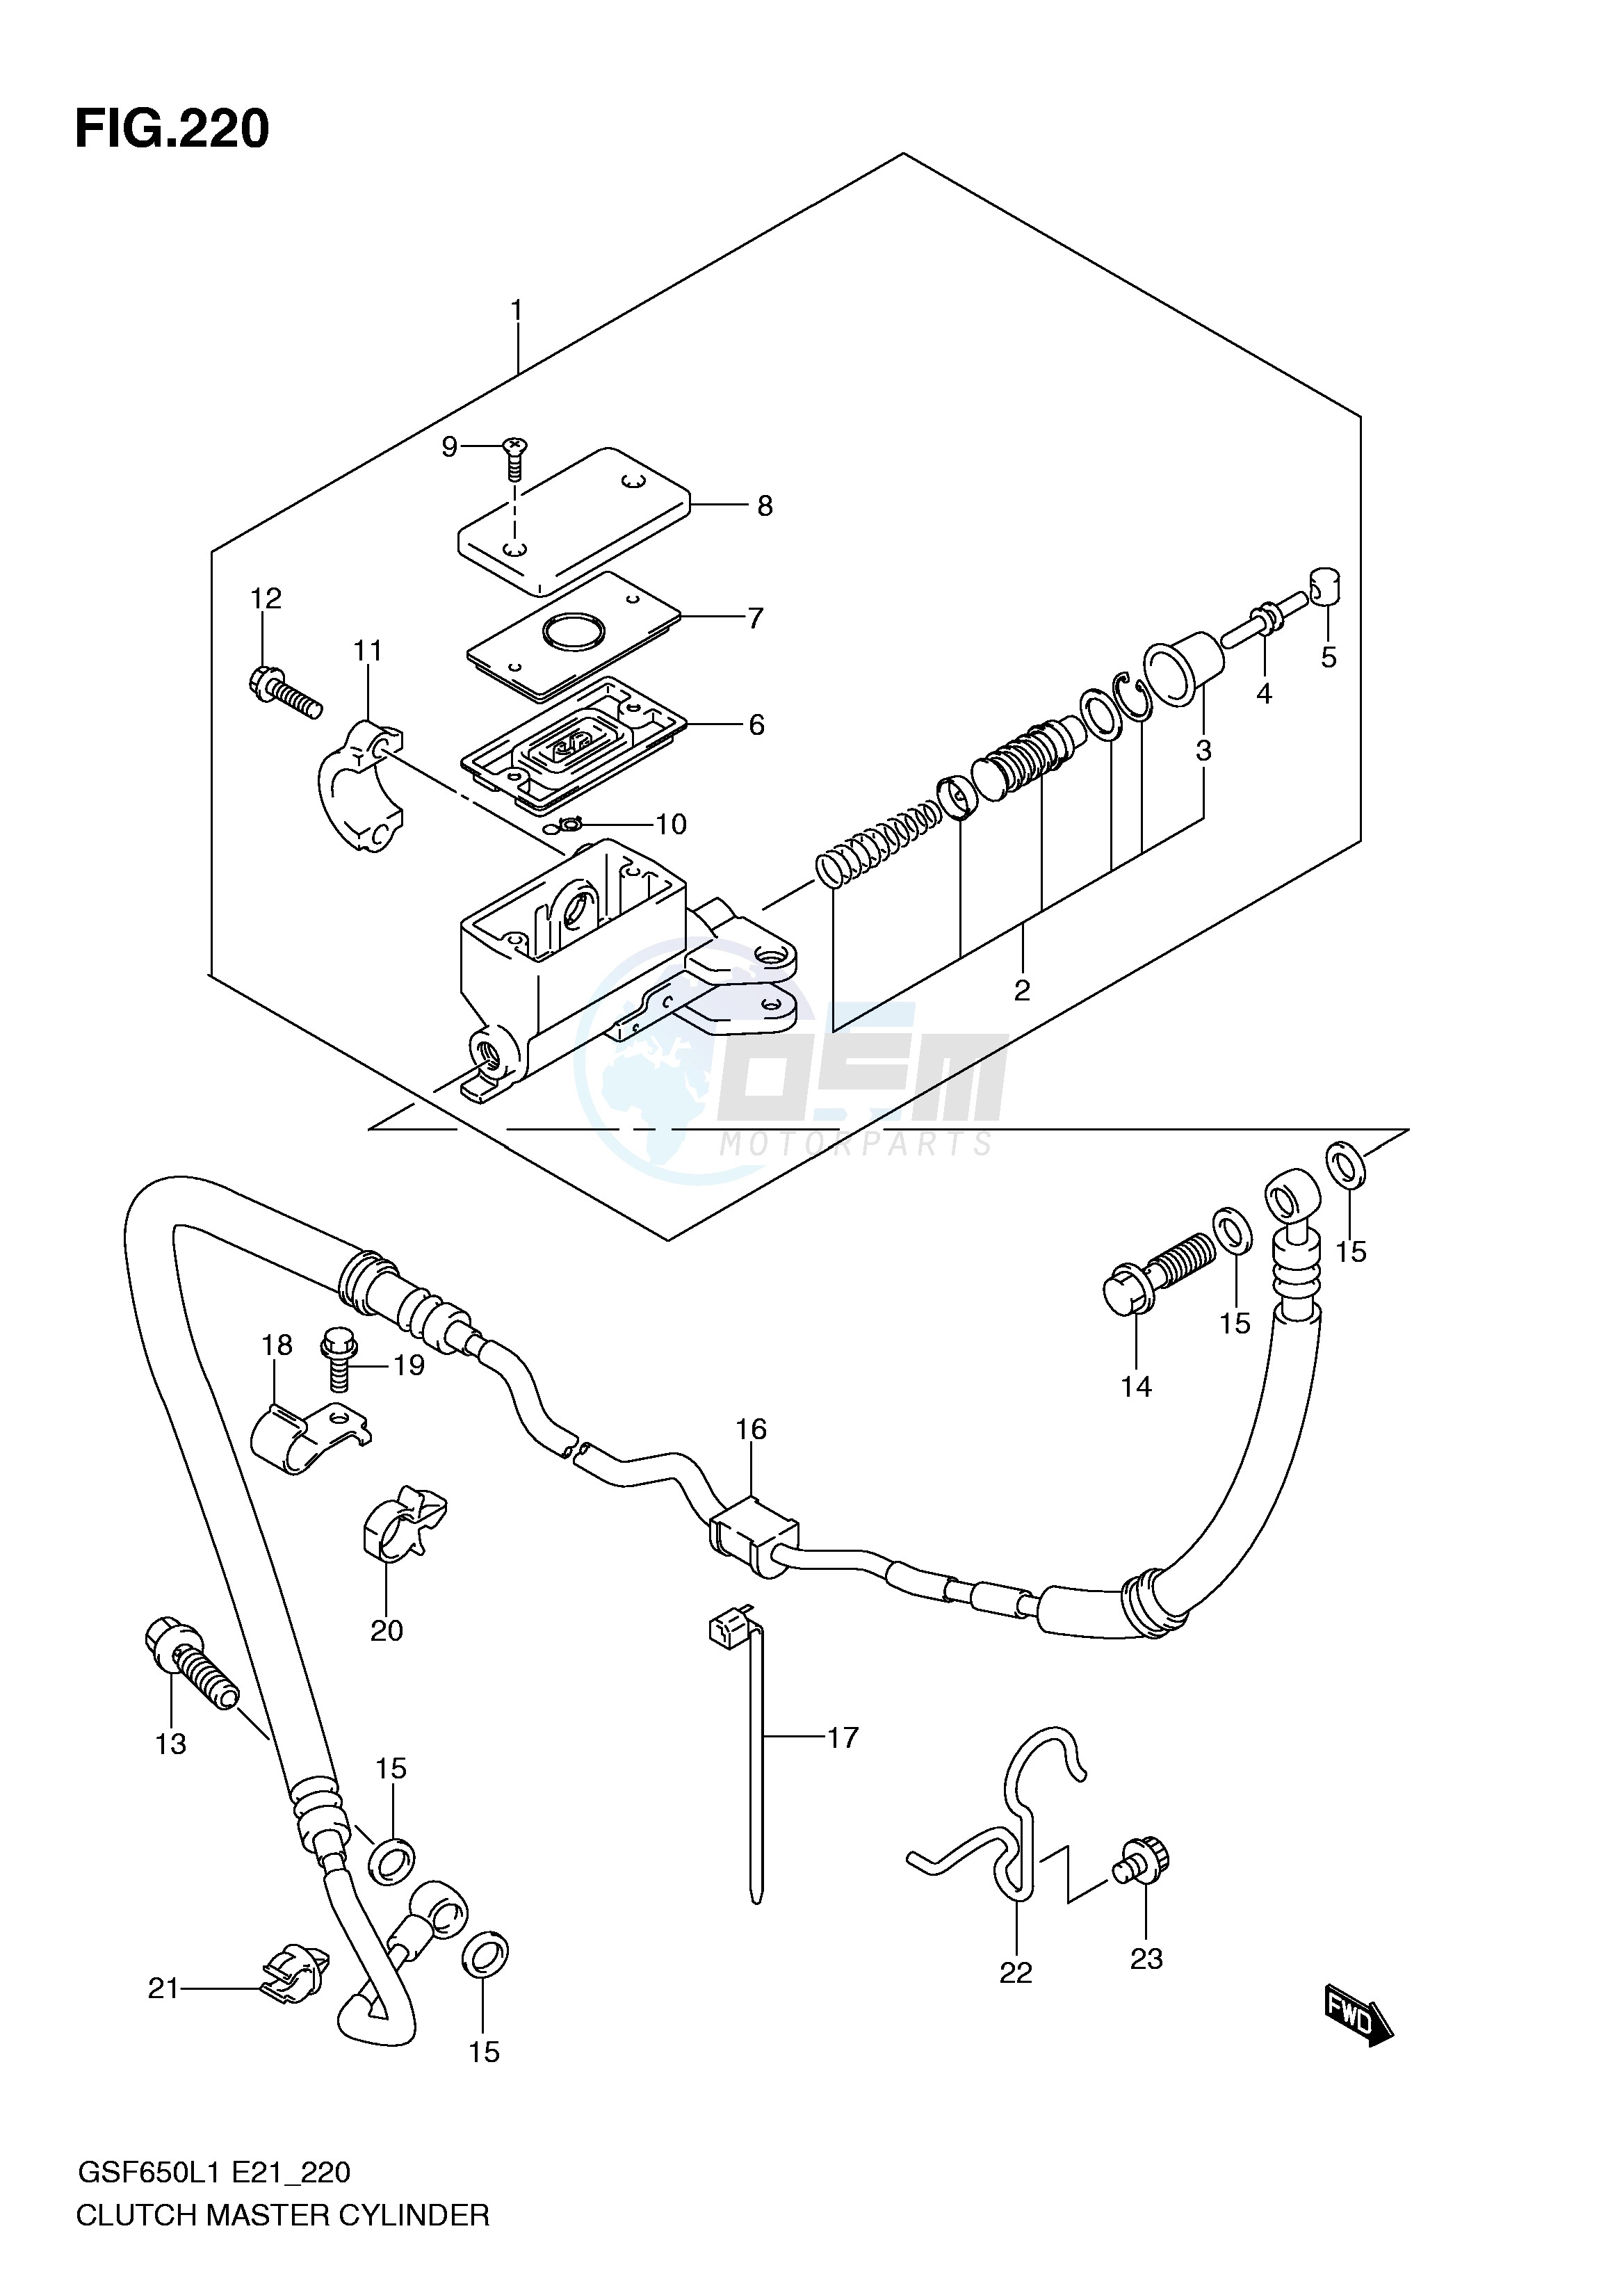 CLUTCH MASTER CYLINDER (GSF650SUAL1 E21) blueprint